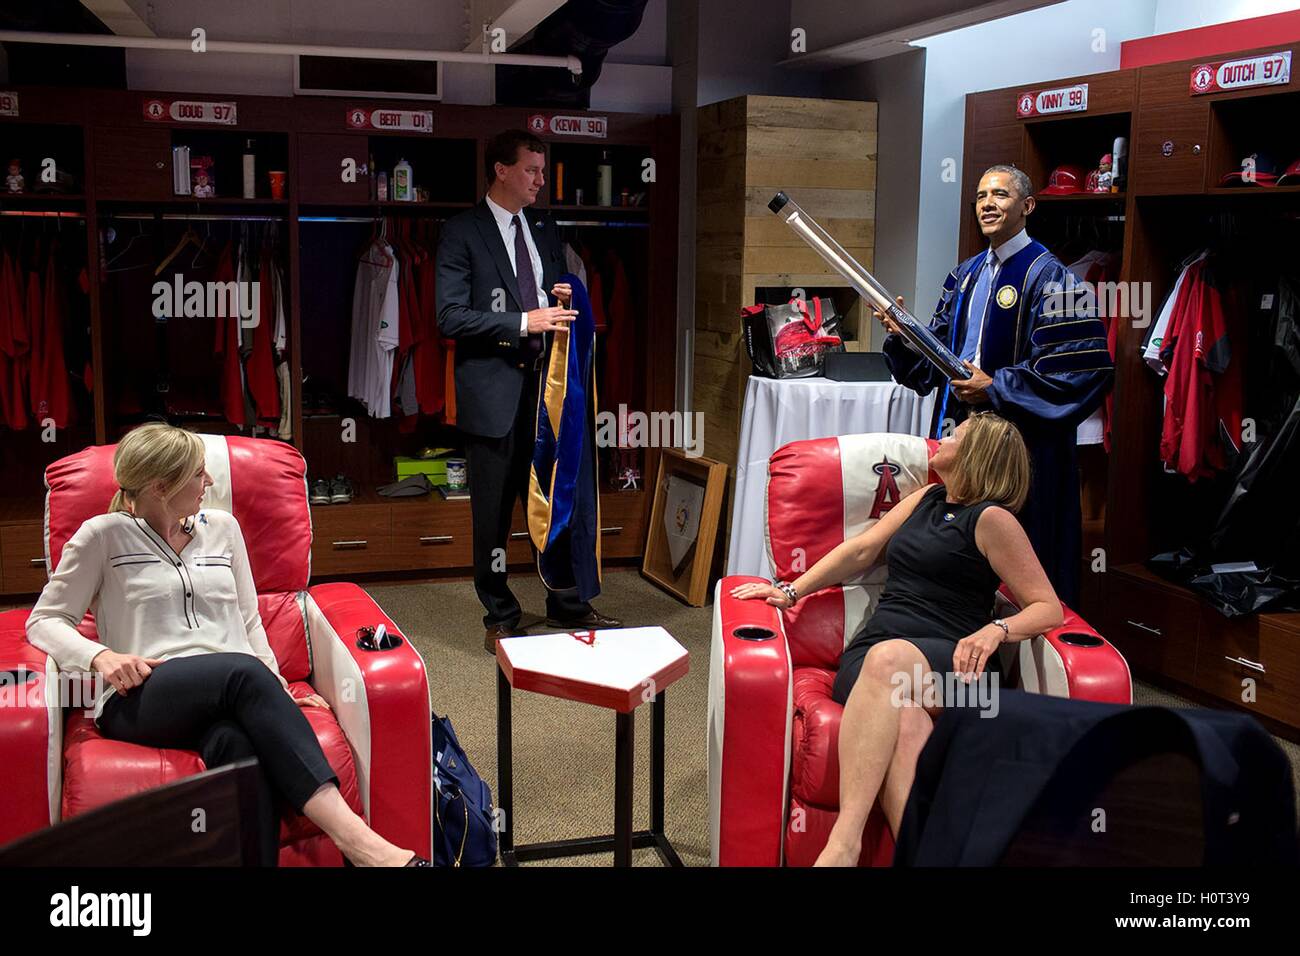 U.S. President Barack Obama jokes with White House staff in the locker room prior to the University of California, Irvine commencement ceremony at the Angels Stadium June 14, 2014 in Anaheim, California. Stock Photo